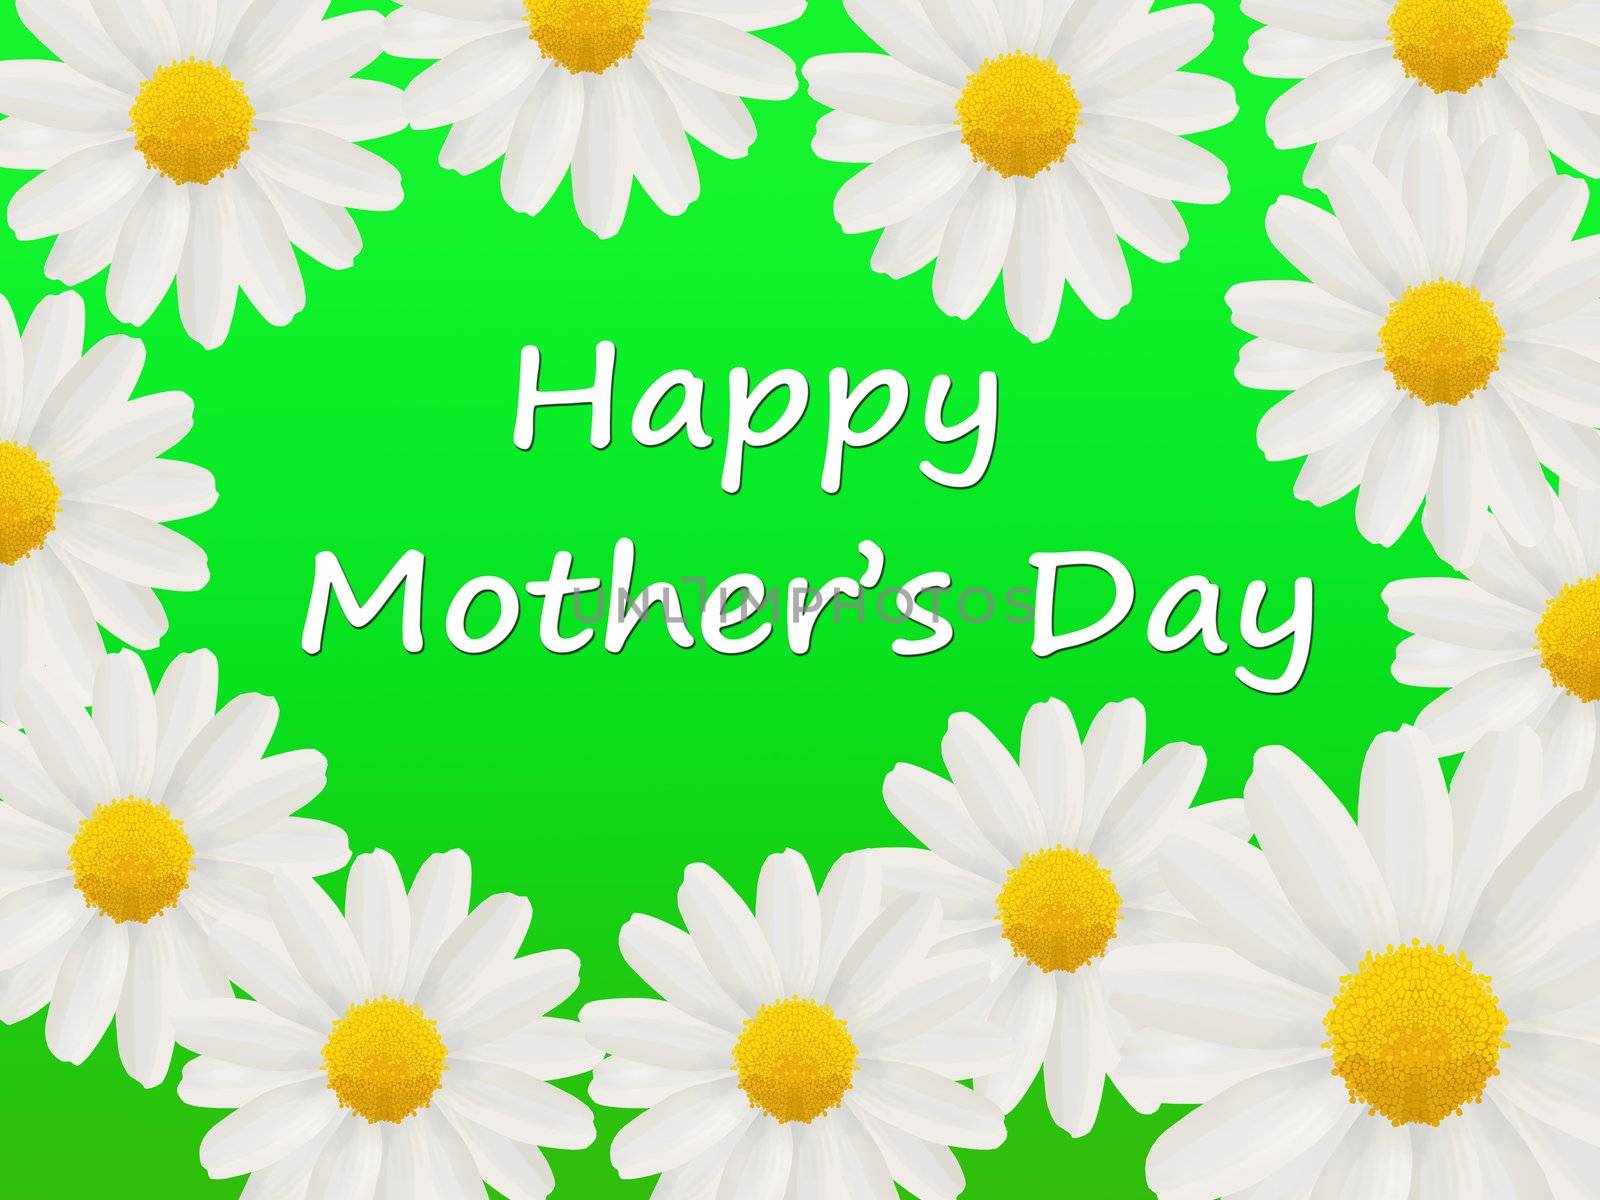 Happy Mother's Day card with white daisies on a green background